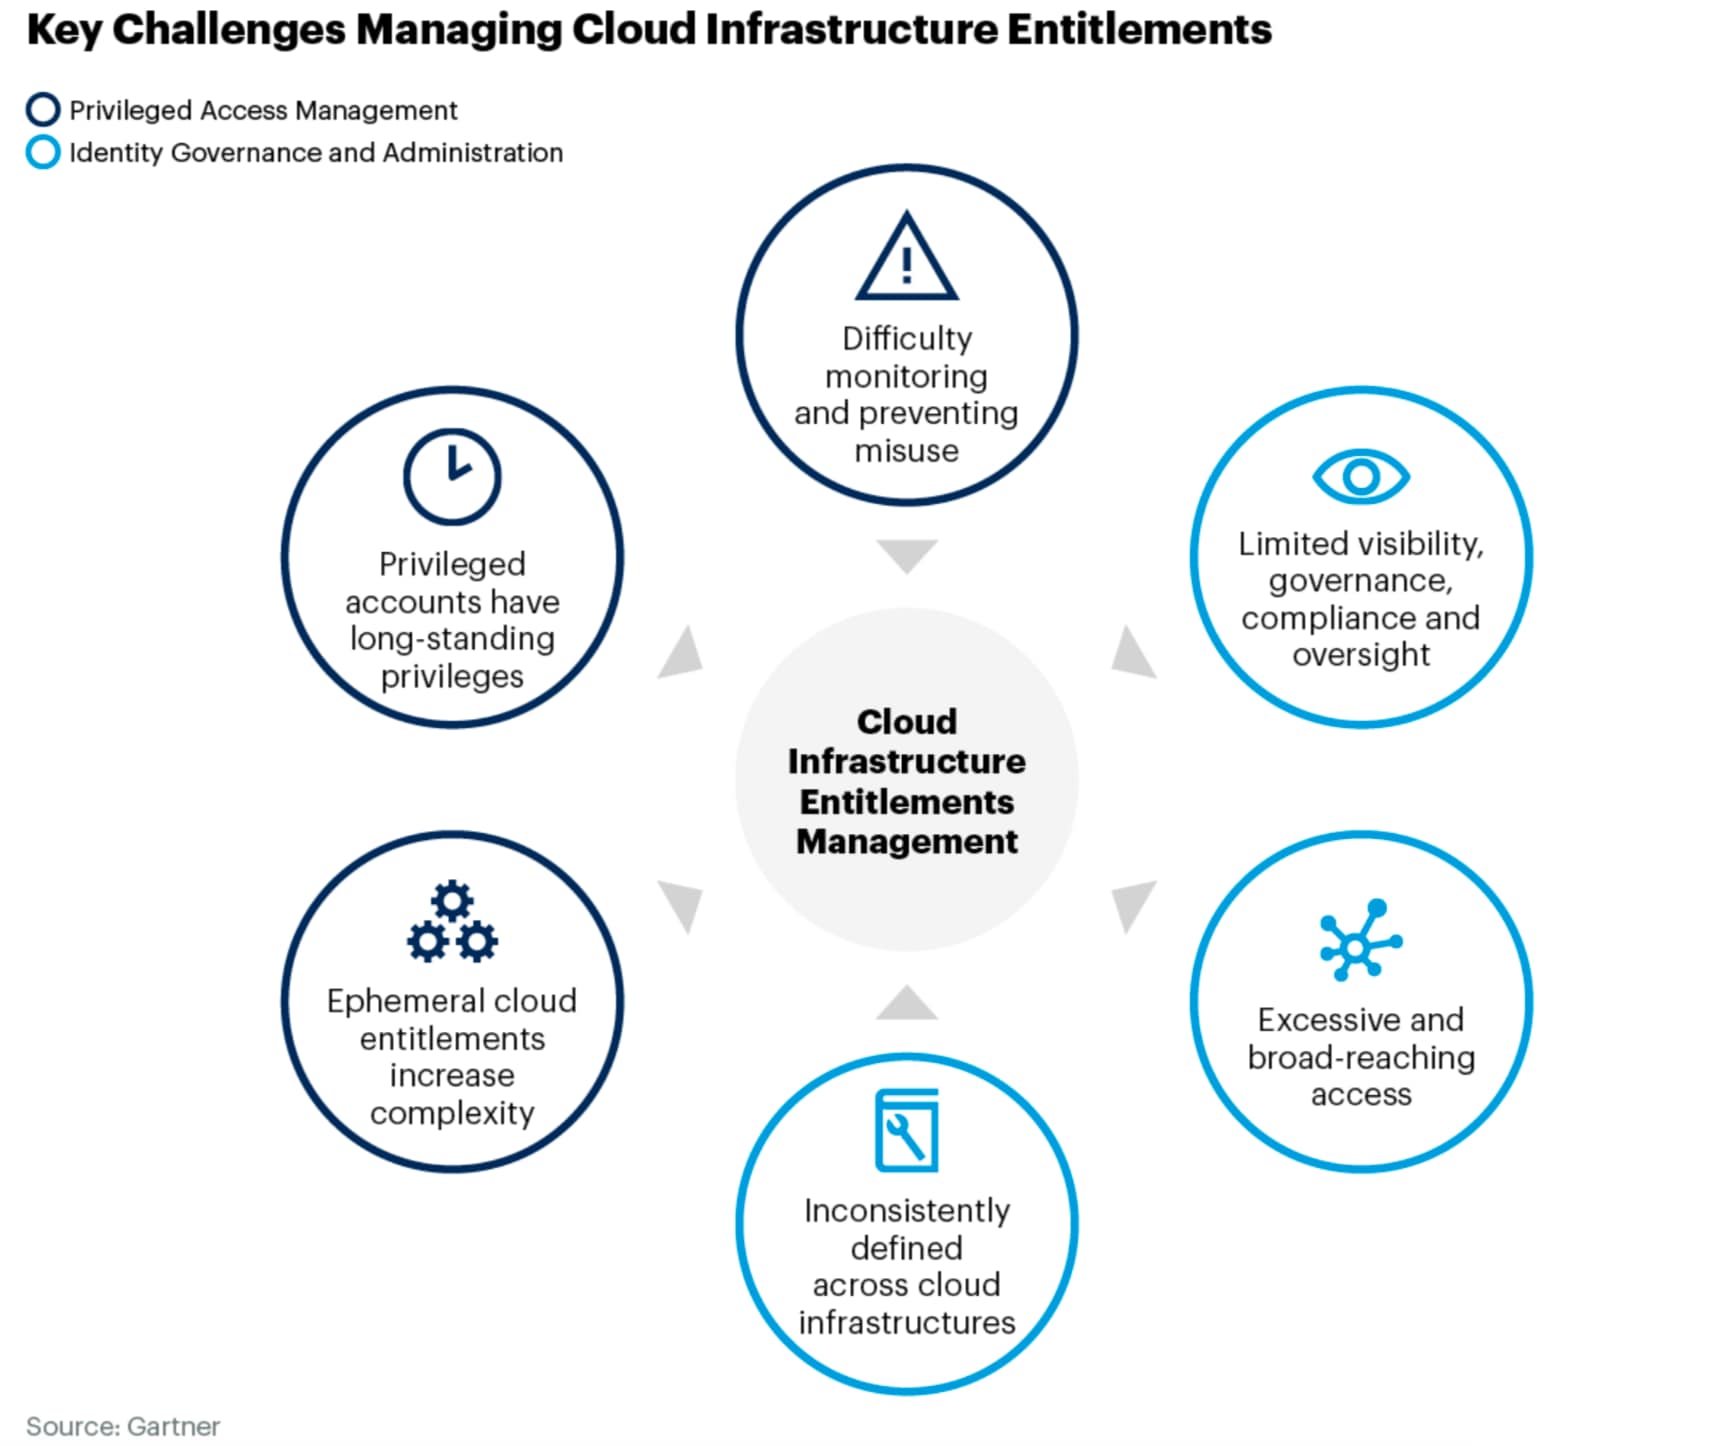 Key Challenges in Cloud Infrastructure Entitlement Management, marked dark blue for Privileged Access Management and light blue for Identity Governance and Administration.